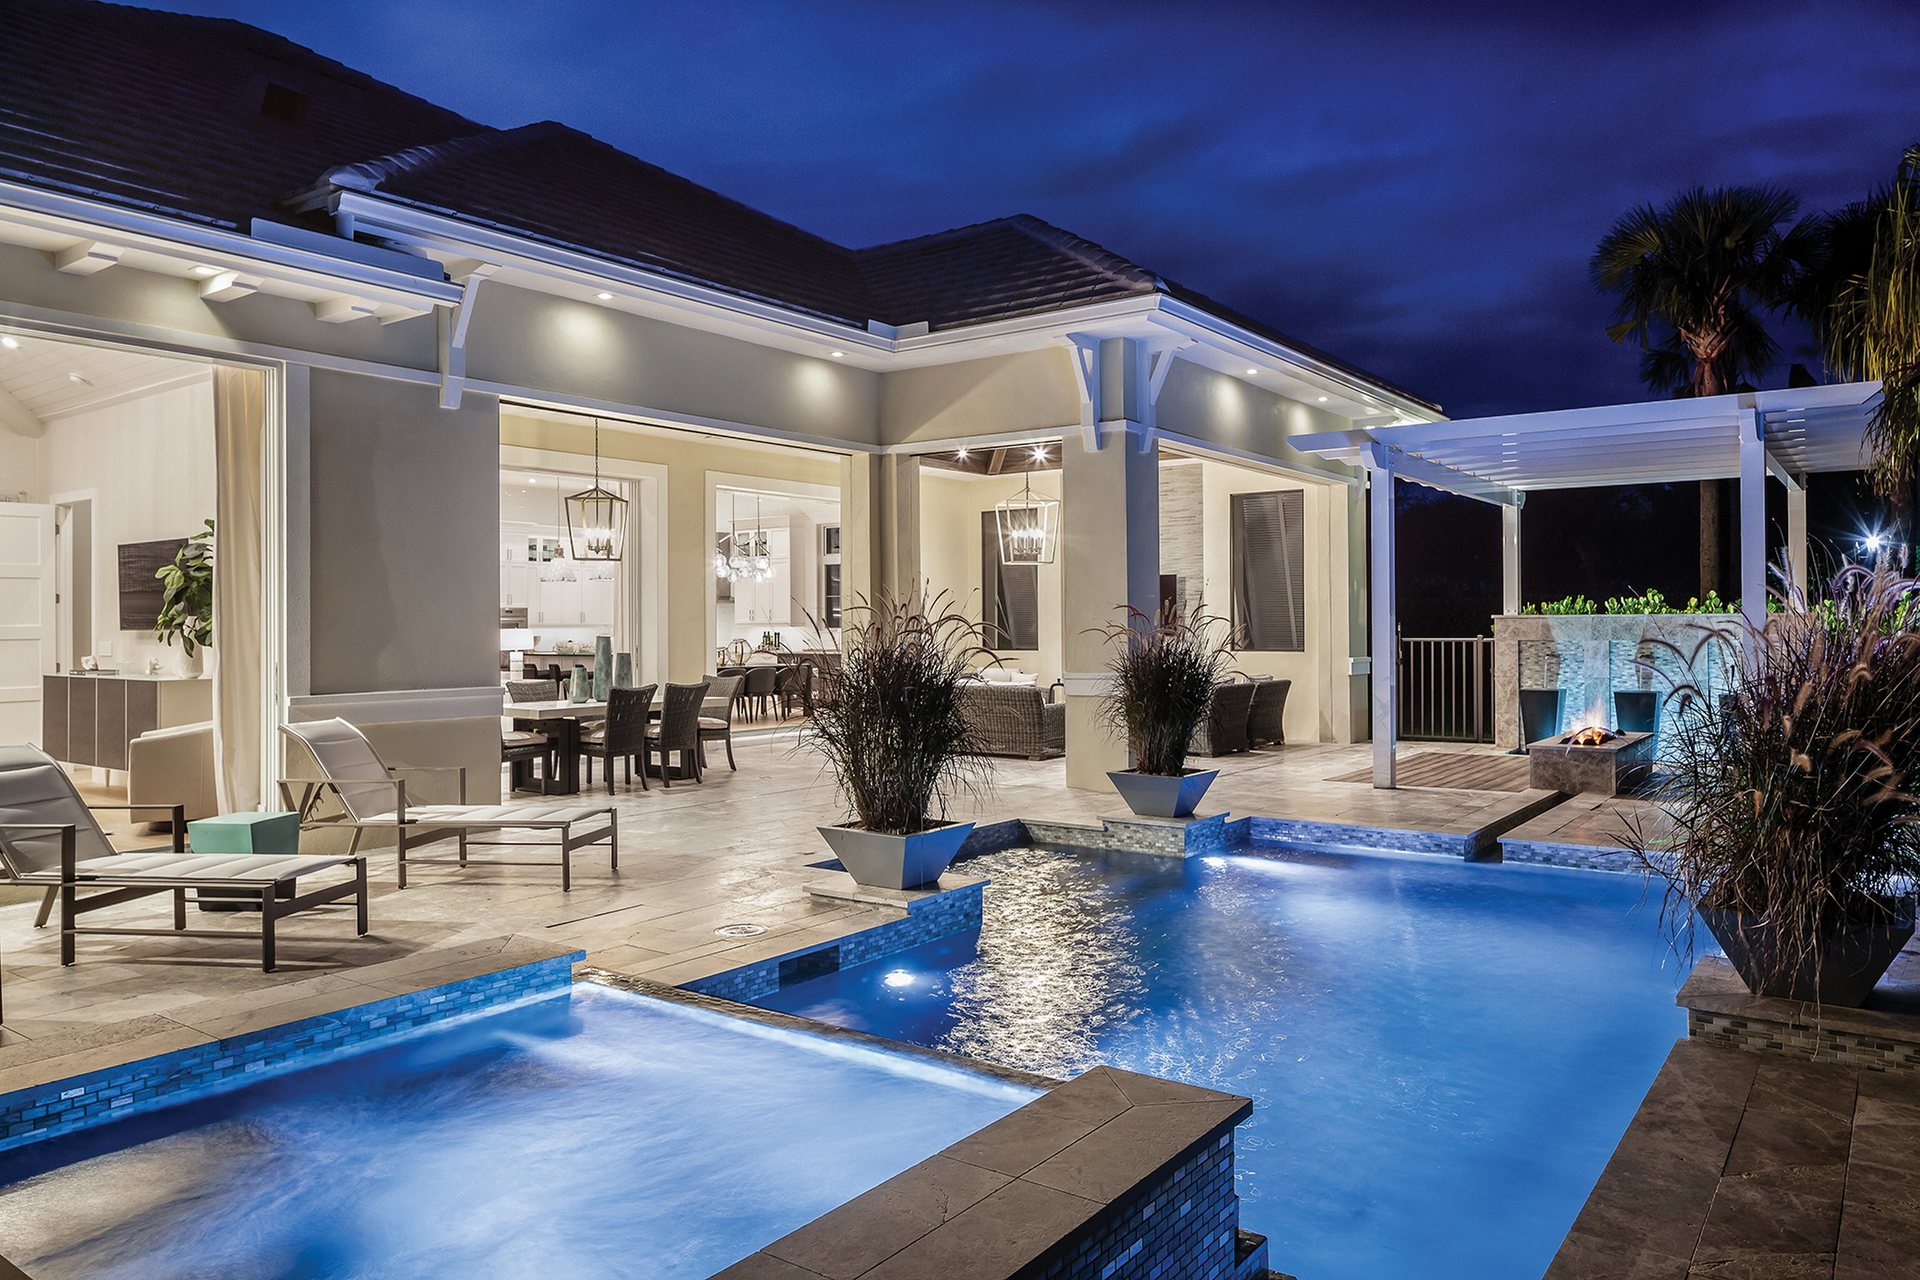 360 VR Virtual Tours of the Gulf Bay Homes | Hibiscus II Model